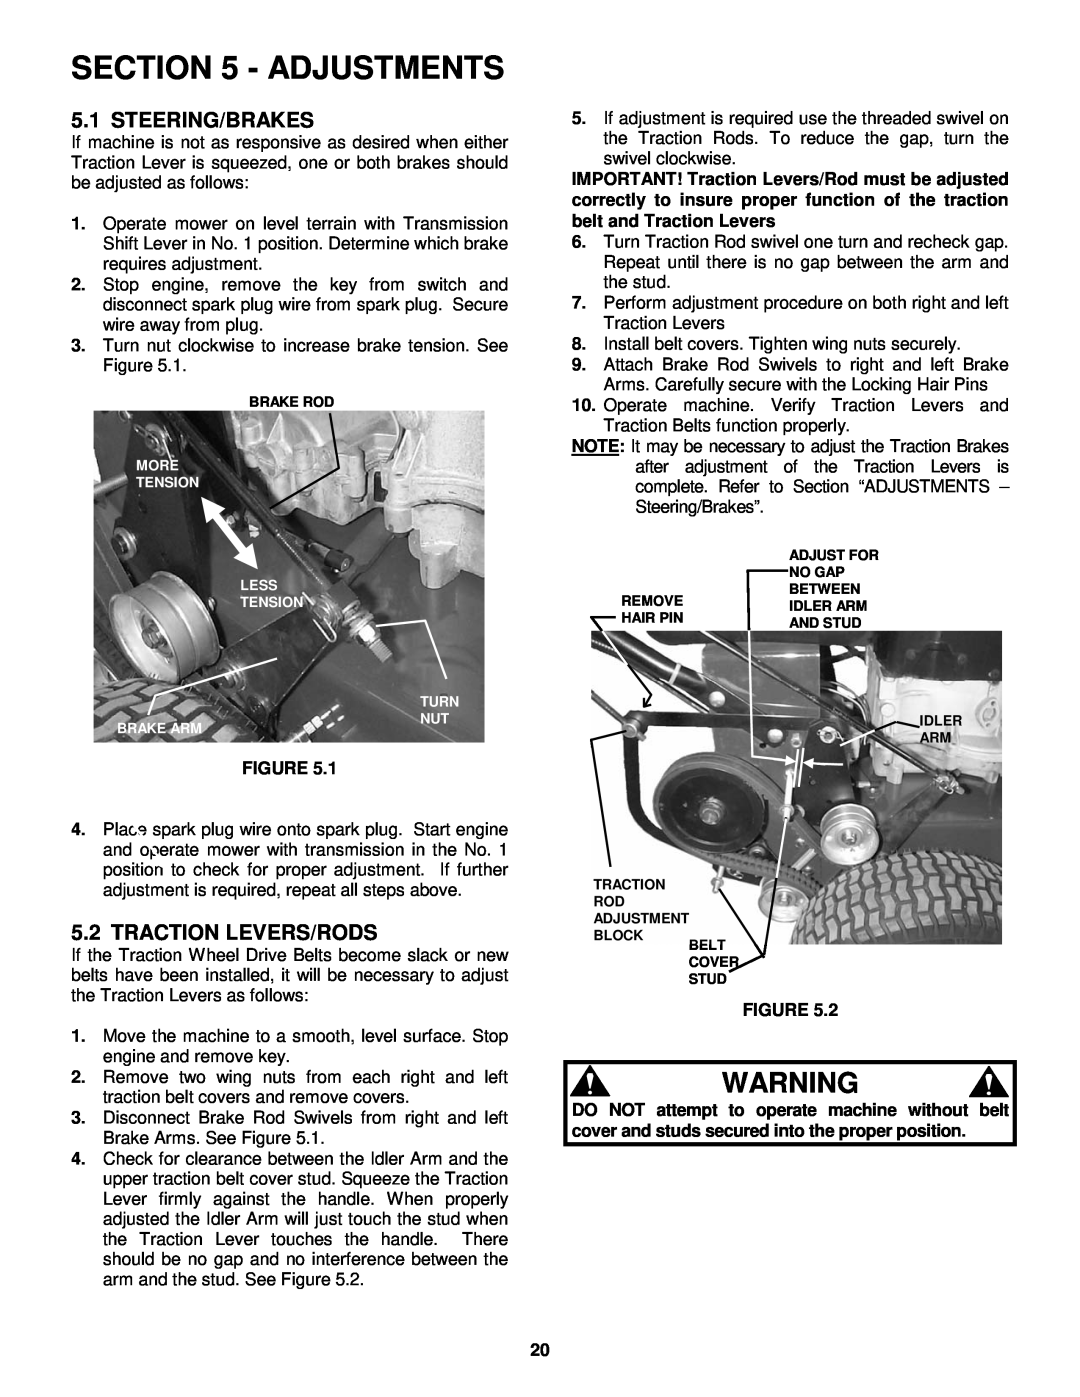 Snapper SPE361, SPEL150KH, SPE481 important safety instructions Adjustments, Steering/Brakes, Traction Levers/Rods 